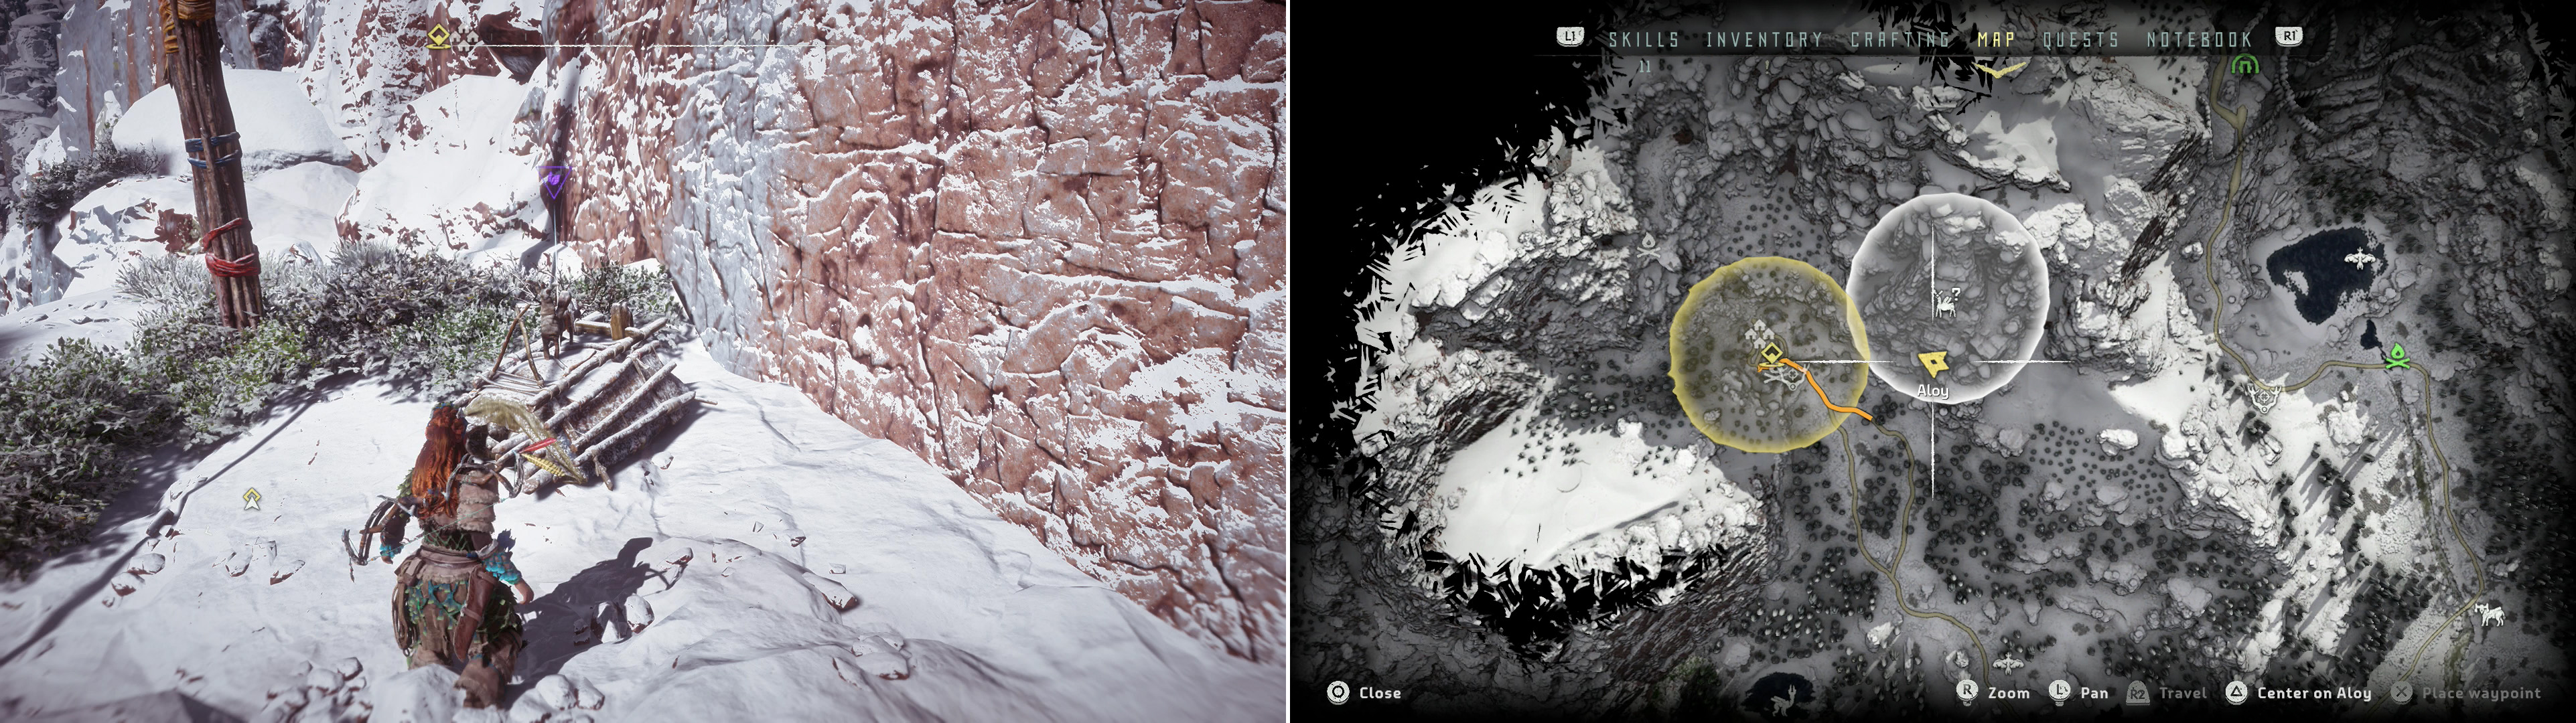 Climb the painted cliffs to find the Banuk Artifact - Punishment (left) at the location indicated on the map (right).